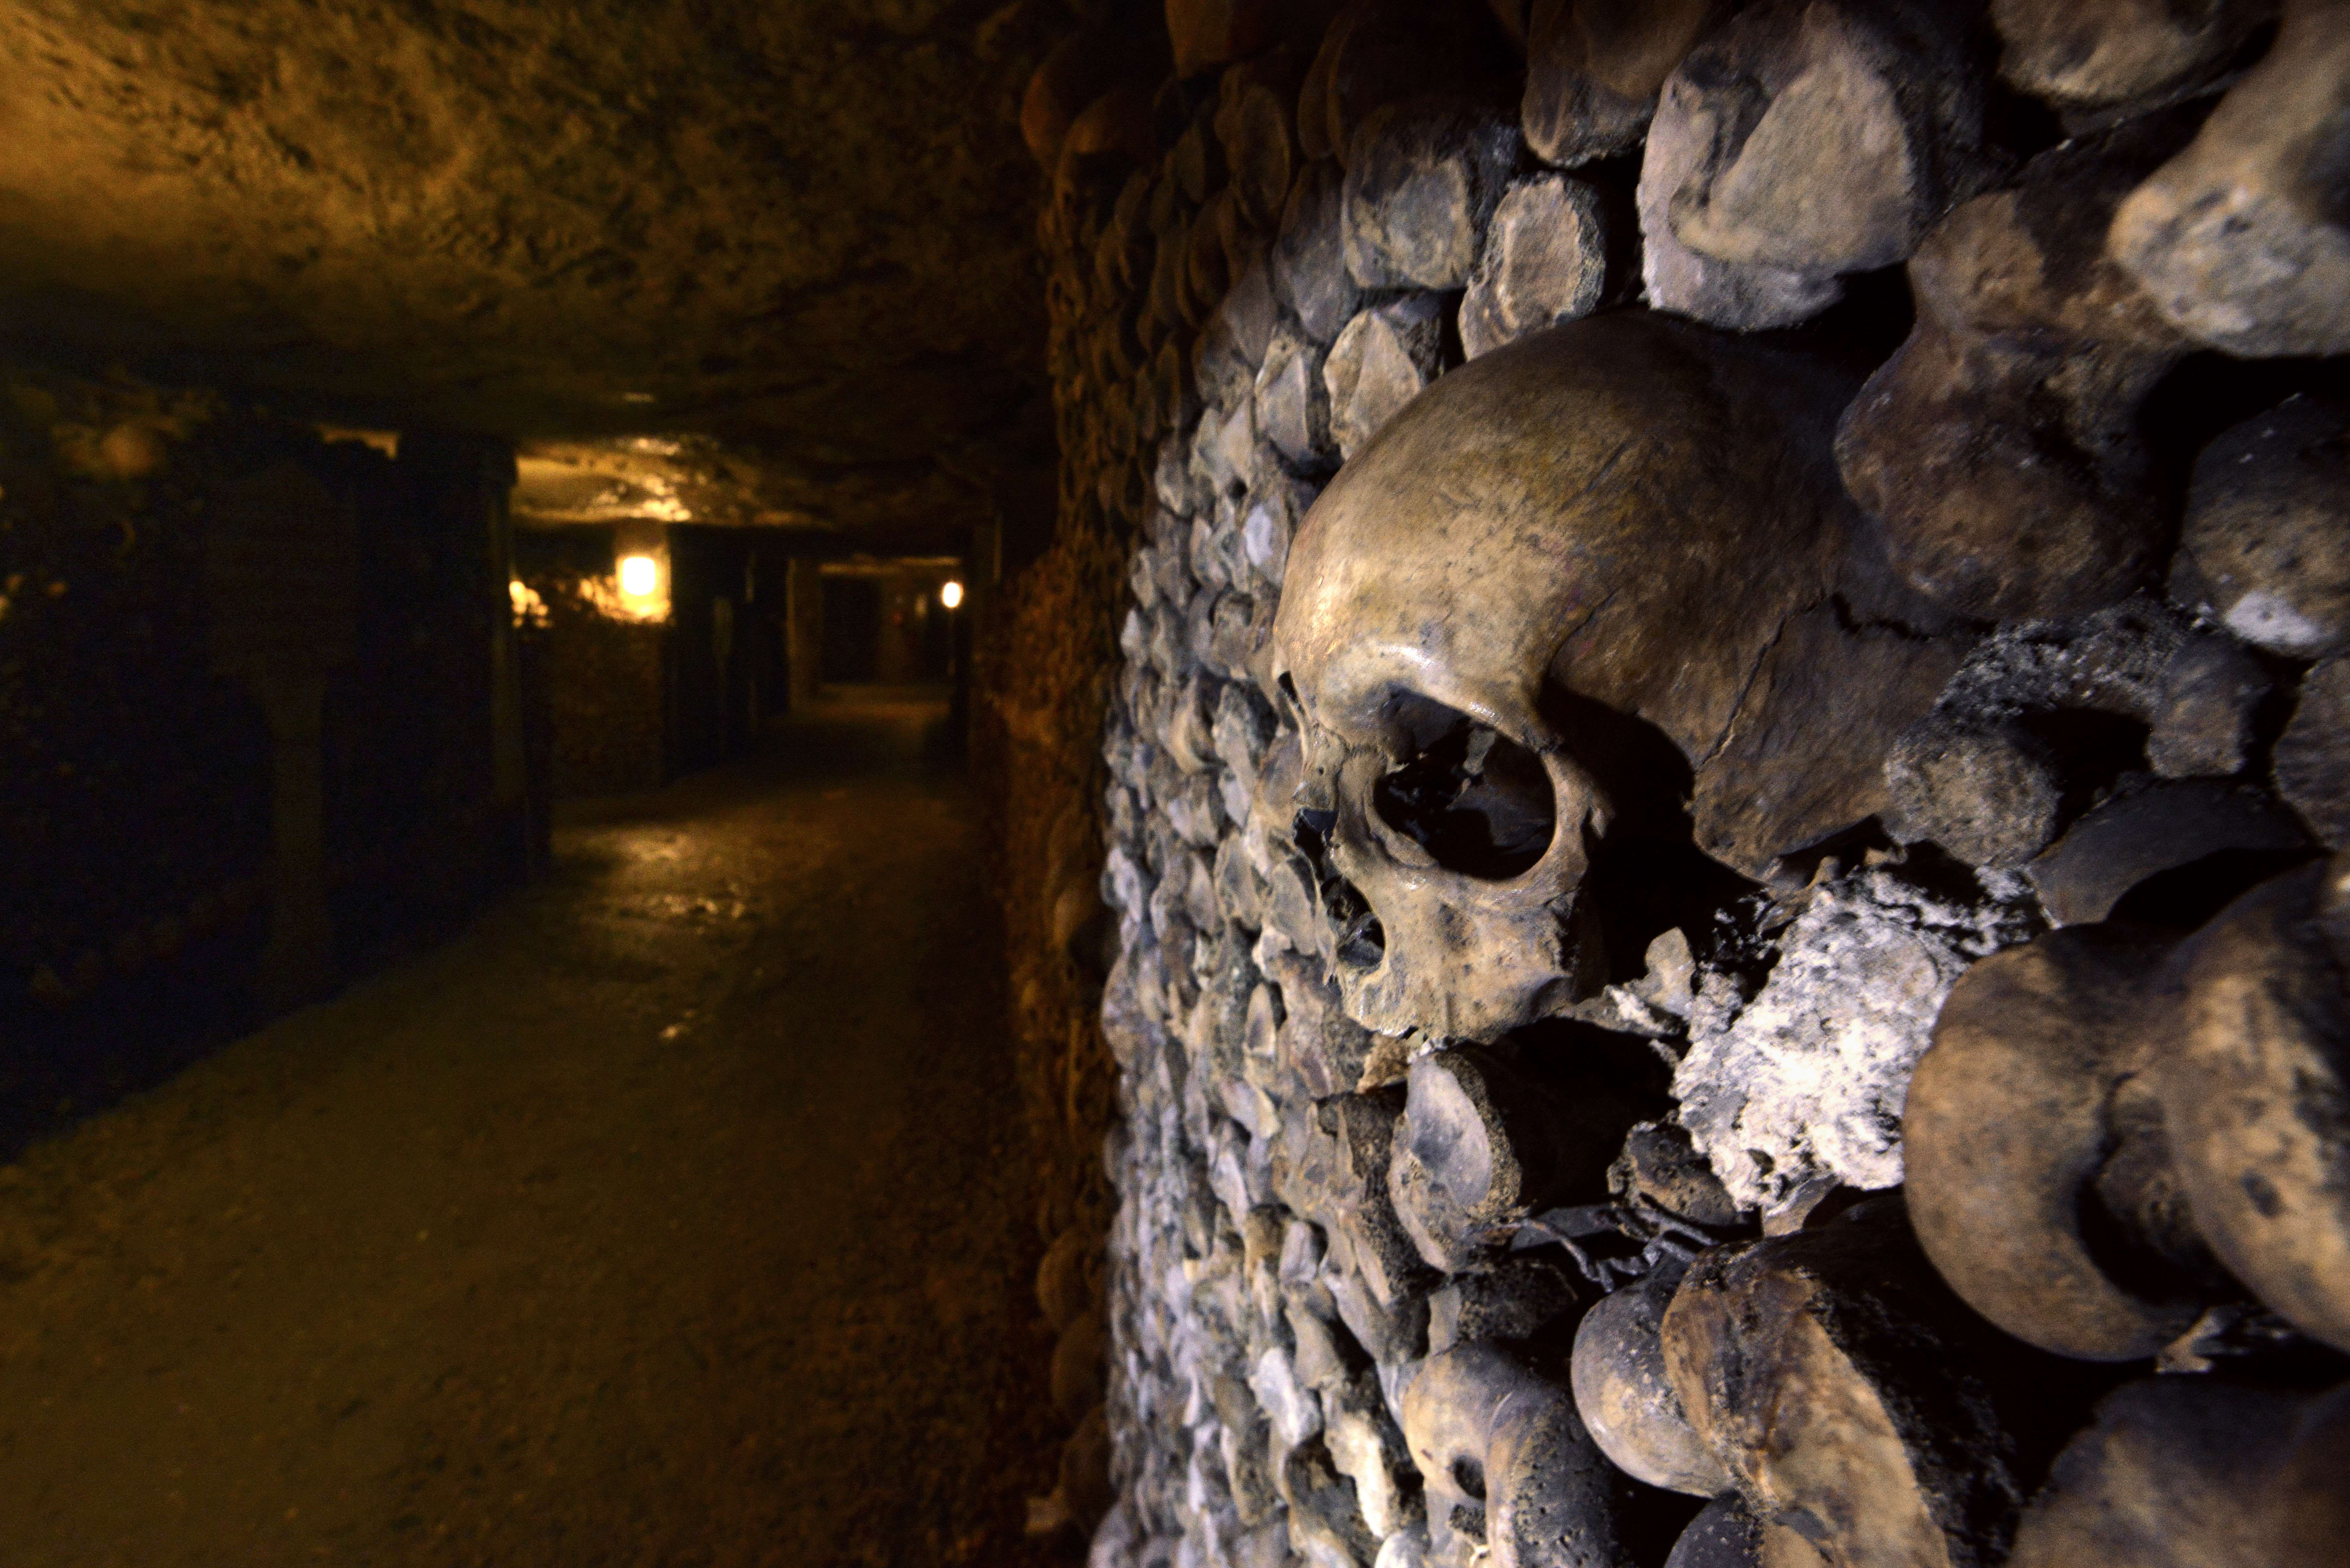 Can you still get lost in the catacombs?